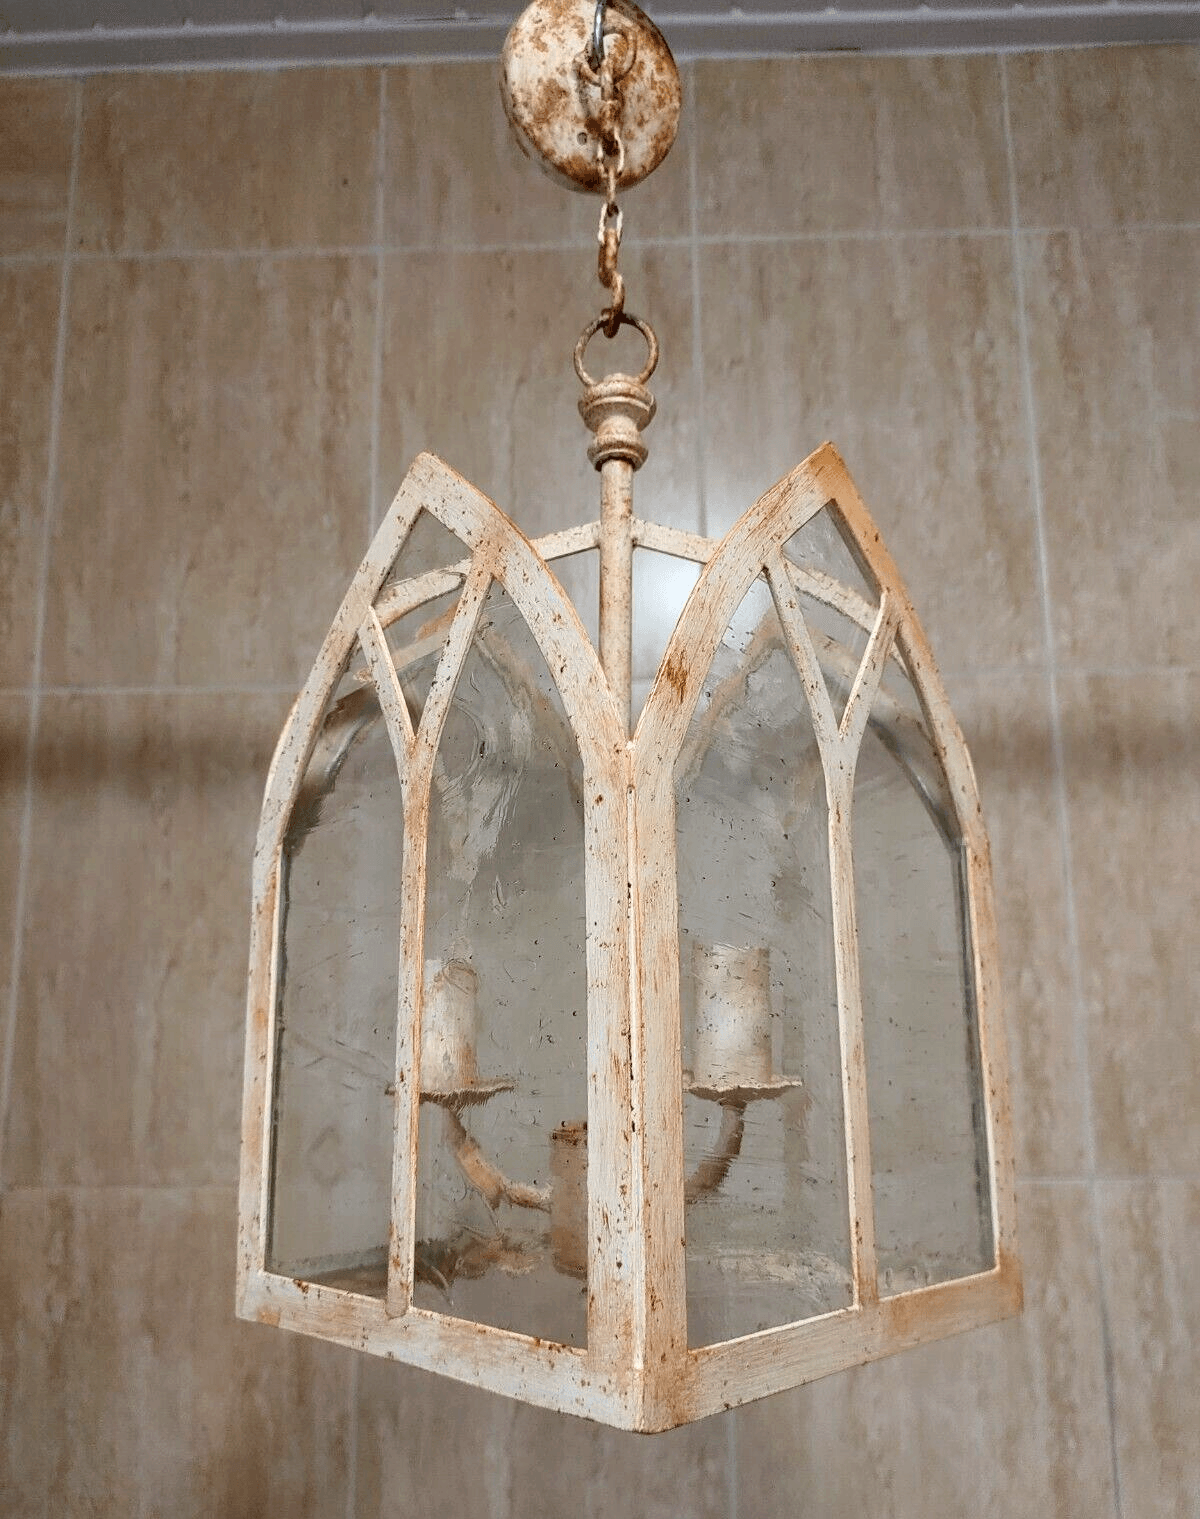 20th Century Gothic Revival Church Window Hanging Ceiling Lantern Light Pendant Glass & Metal - Tommy's Treasure